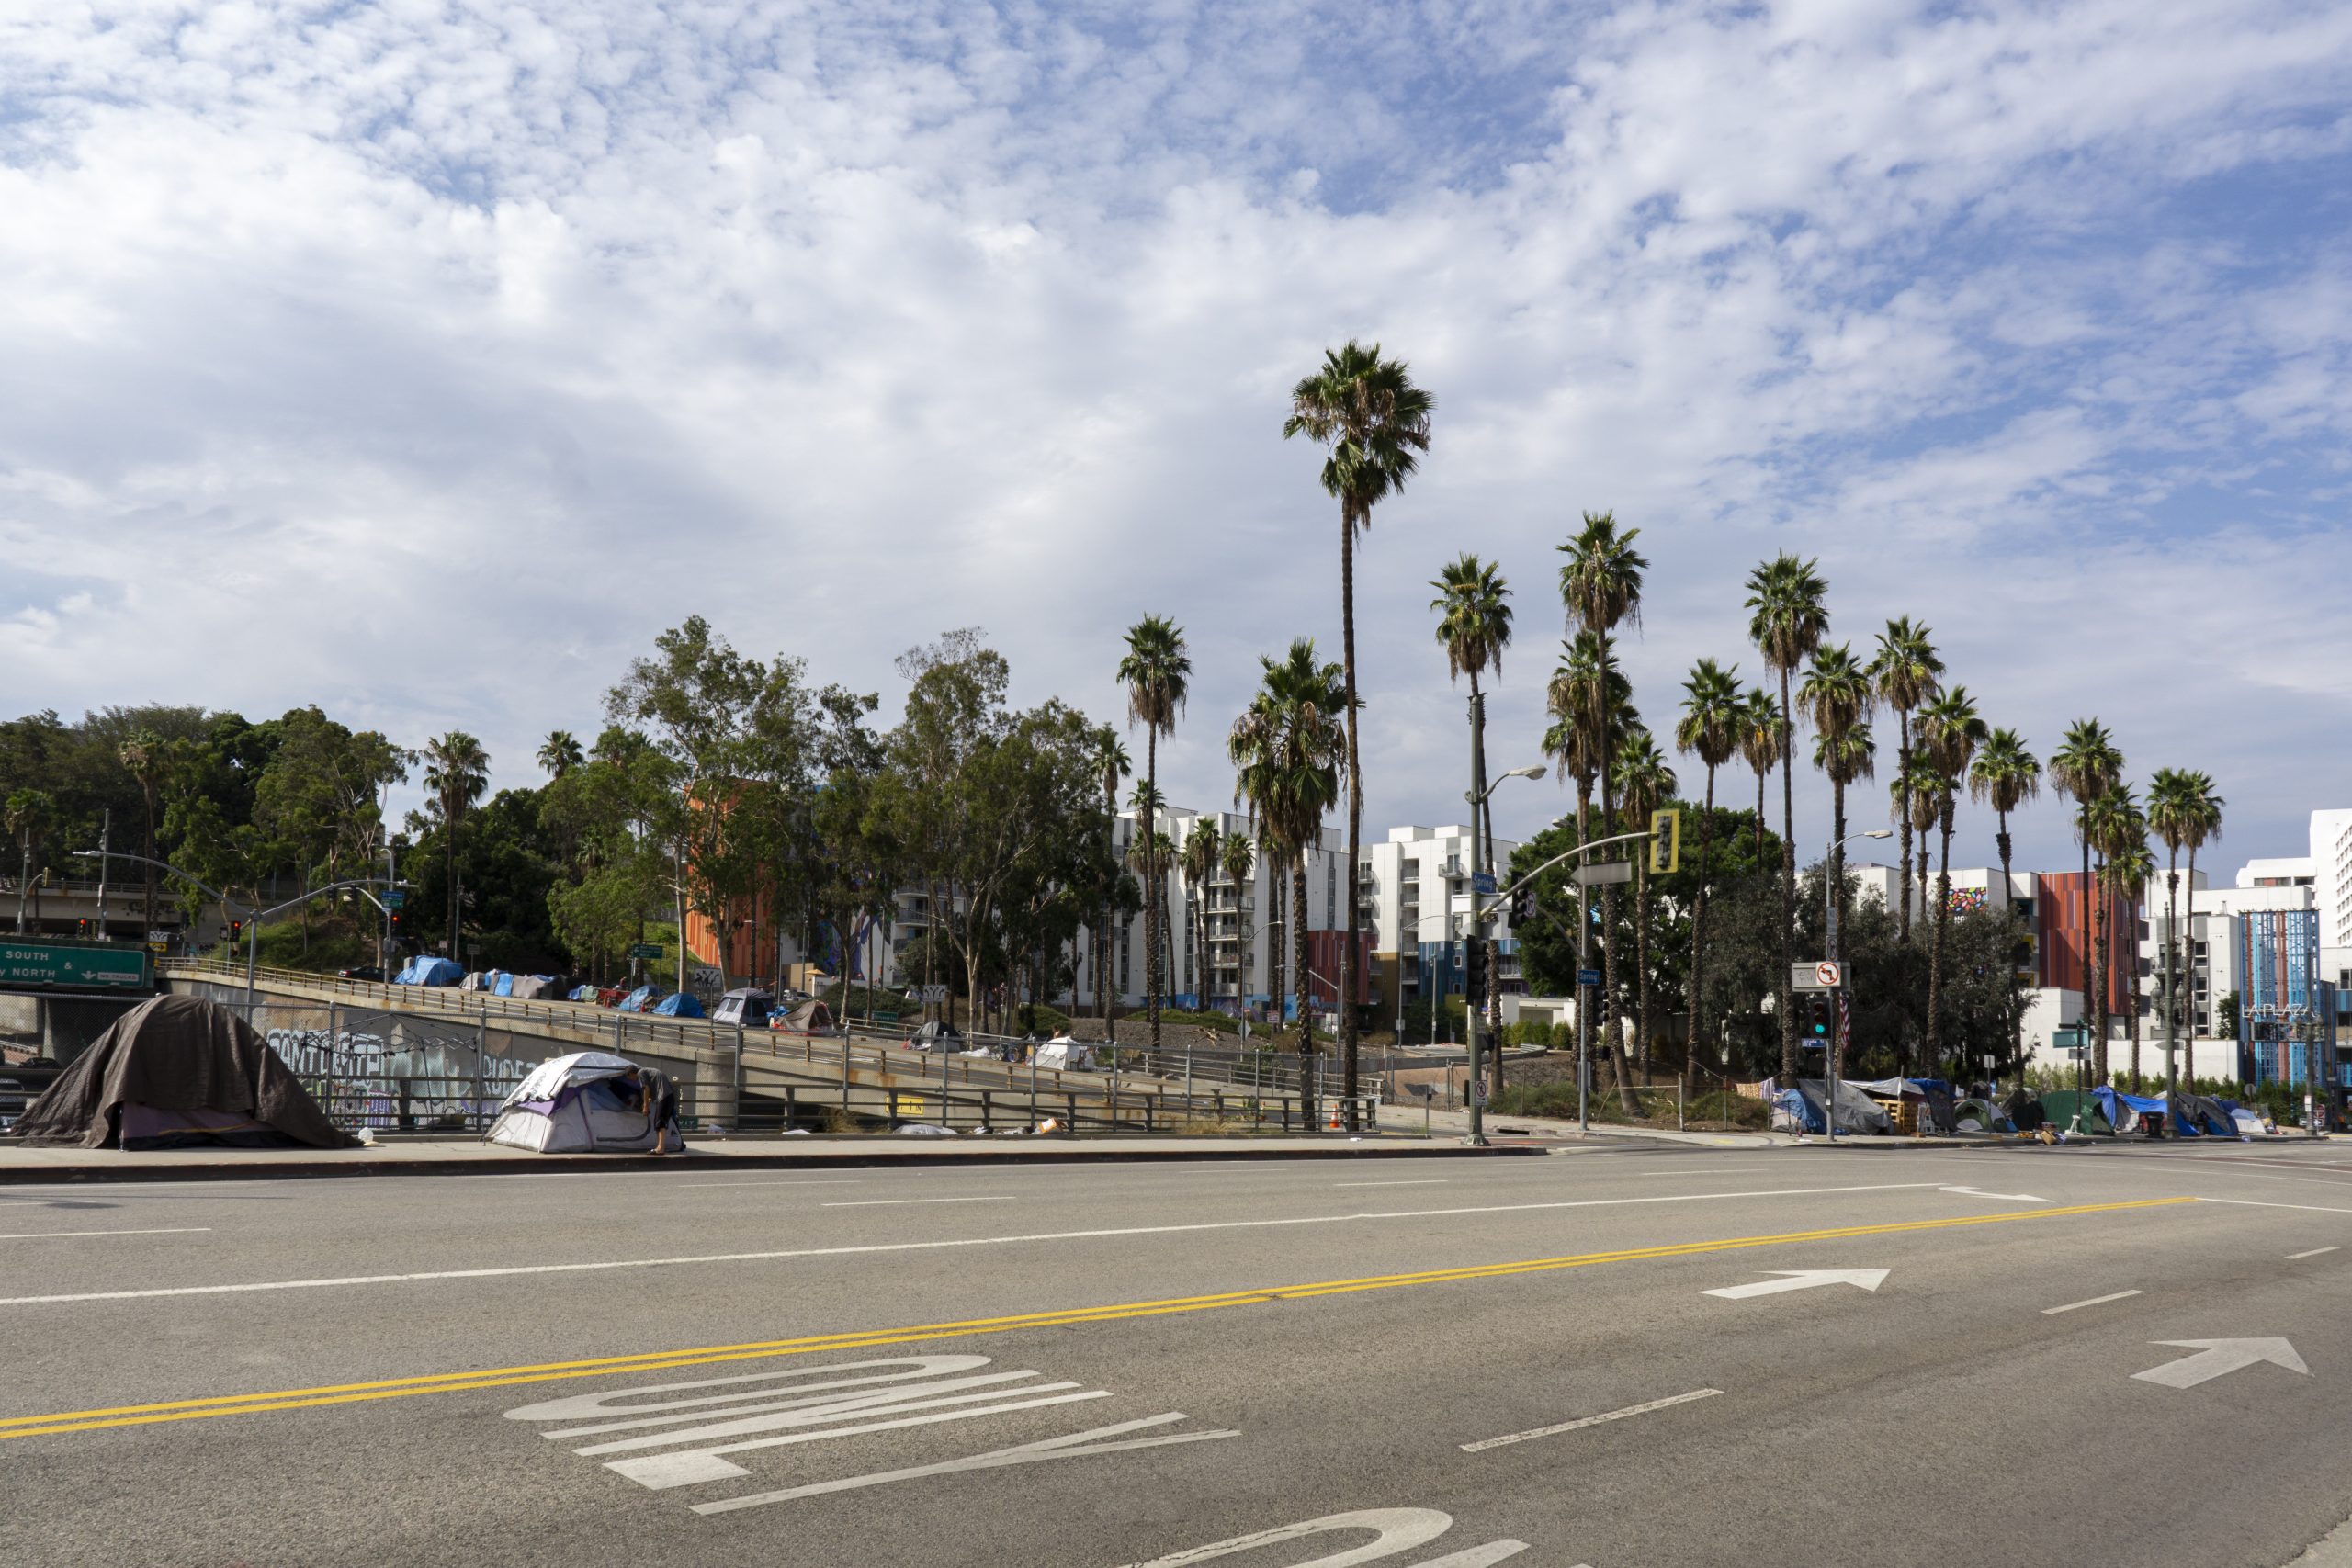 View from across the road of homeless tents lining the freeway in Los Angeles. Behind them are palm trees, with multistory apartment buildings in the background